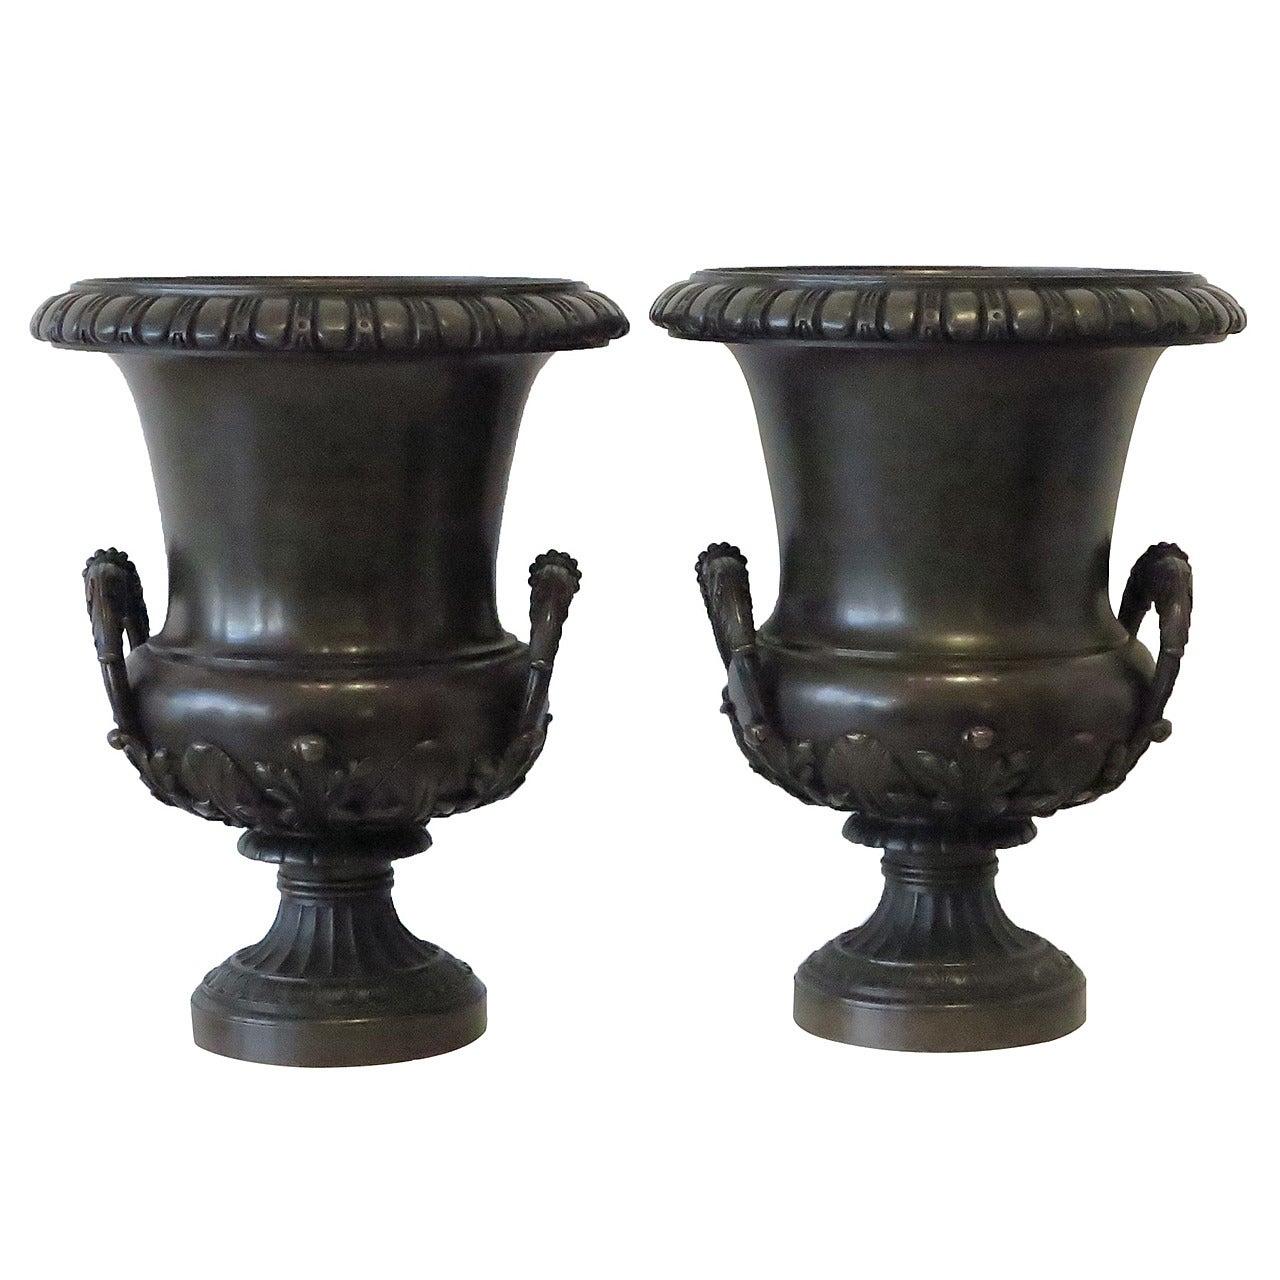 Pair of 19th Century French Neoclassical Bronze Urns